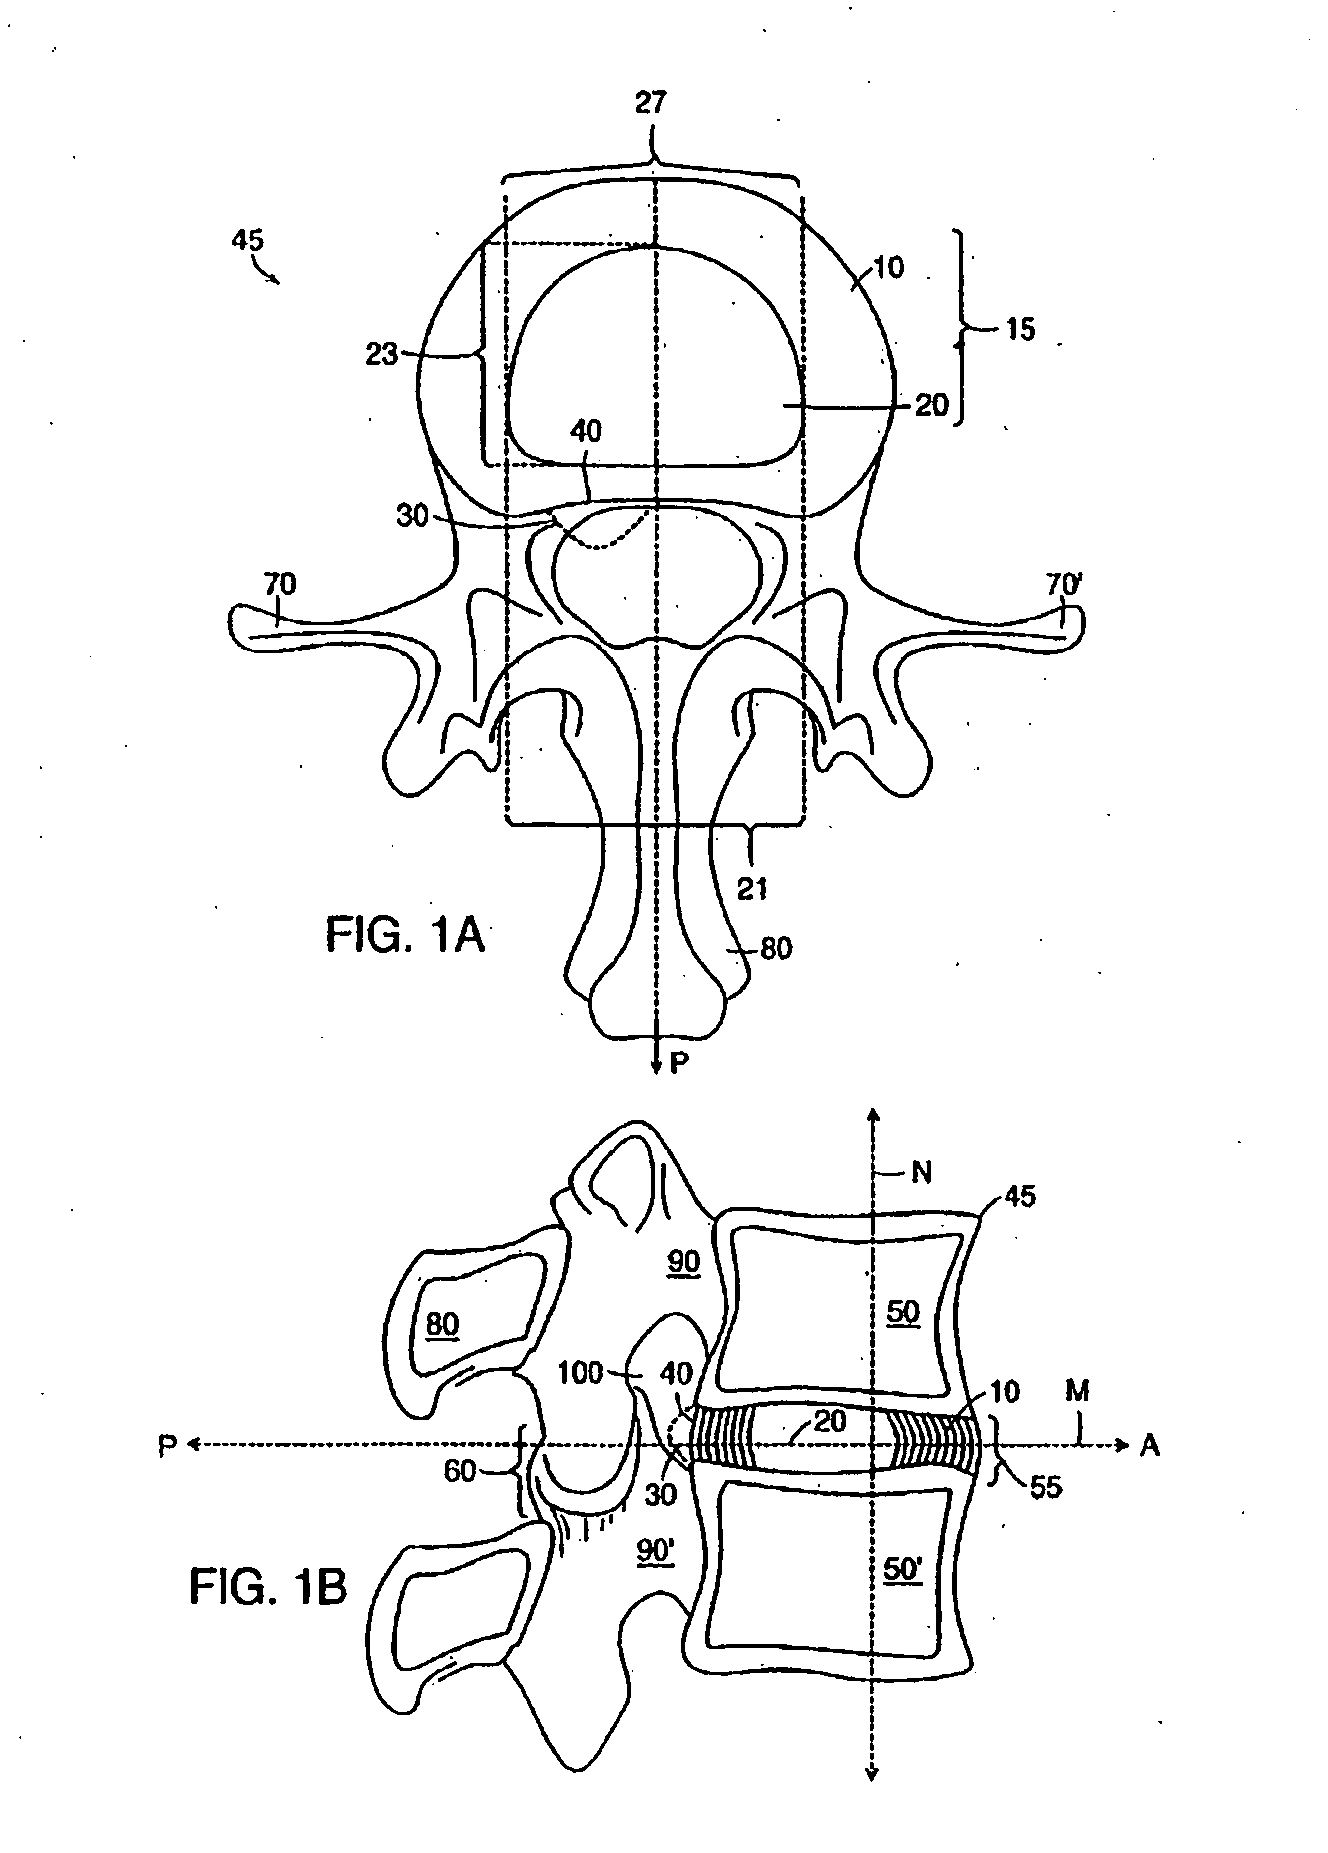 Method of anchoring an implant in an intervertebral disc